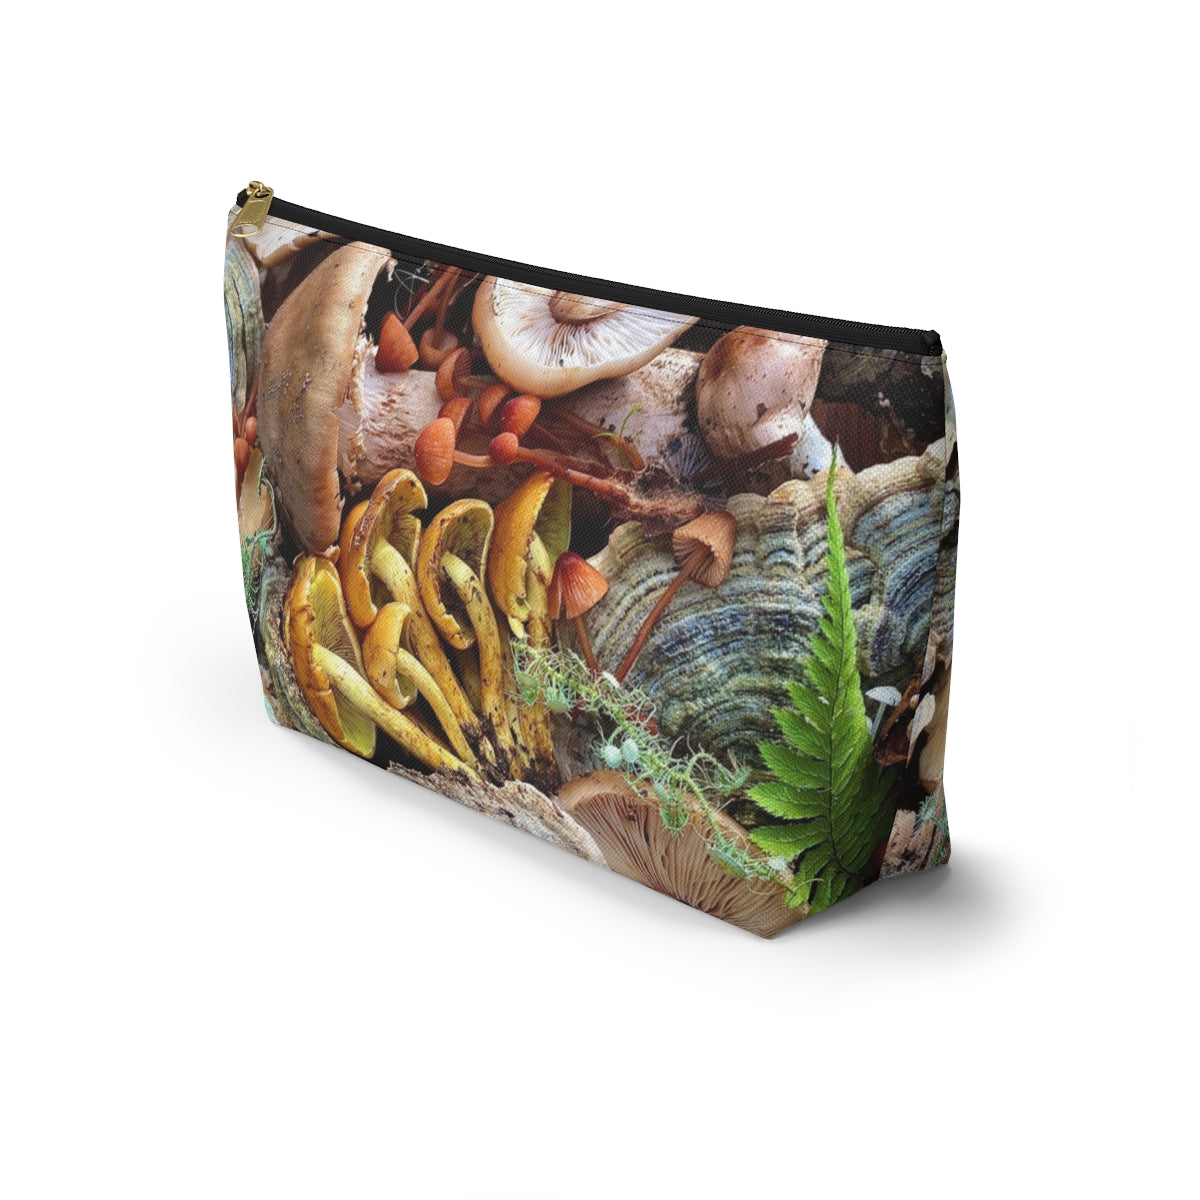 Summit Harvest - Accessory Pouch w T-bottom